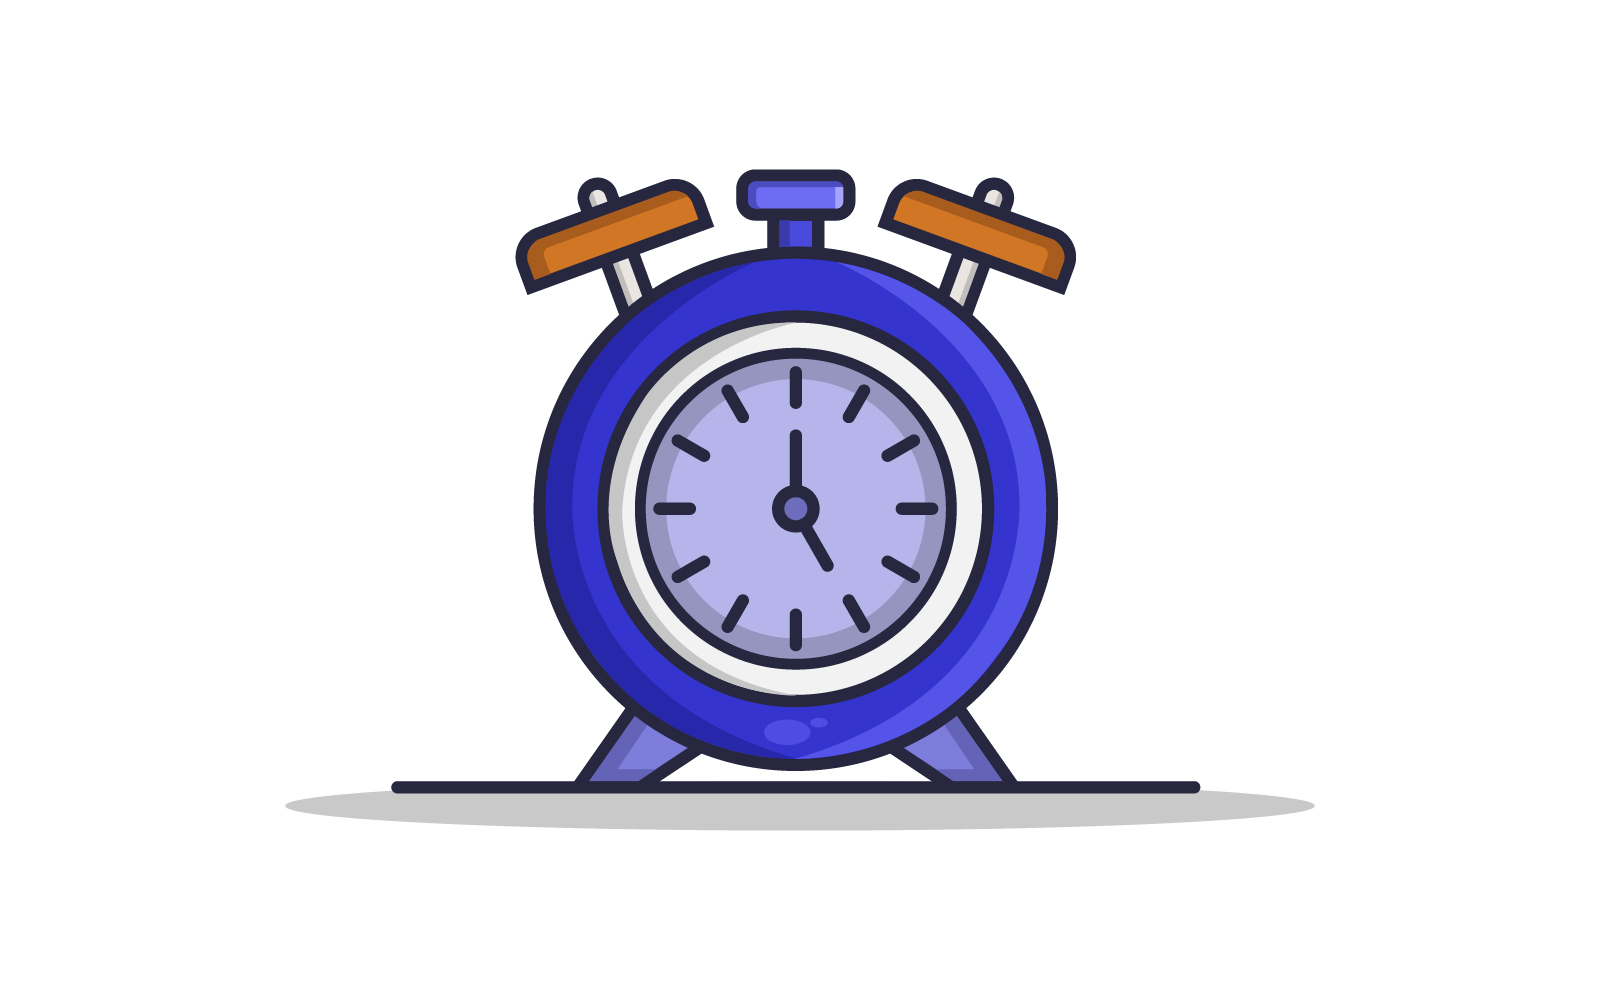 Alarm clock in vector on a background